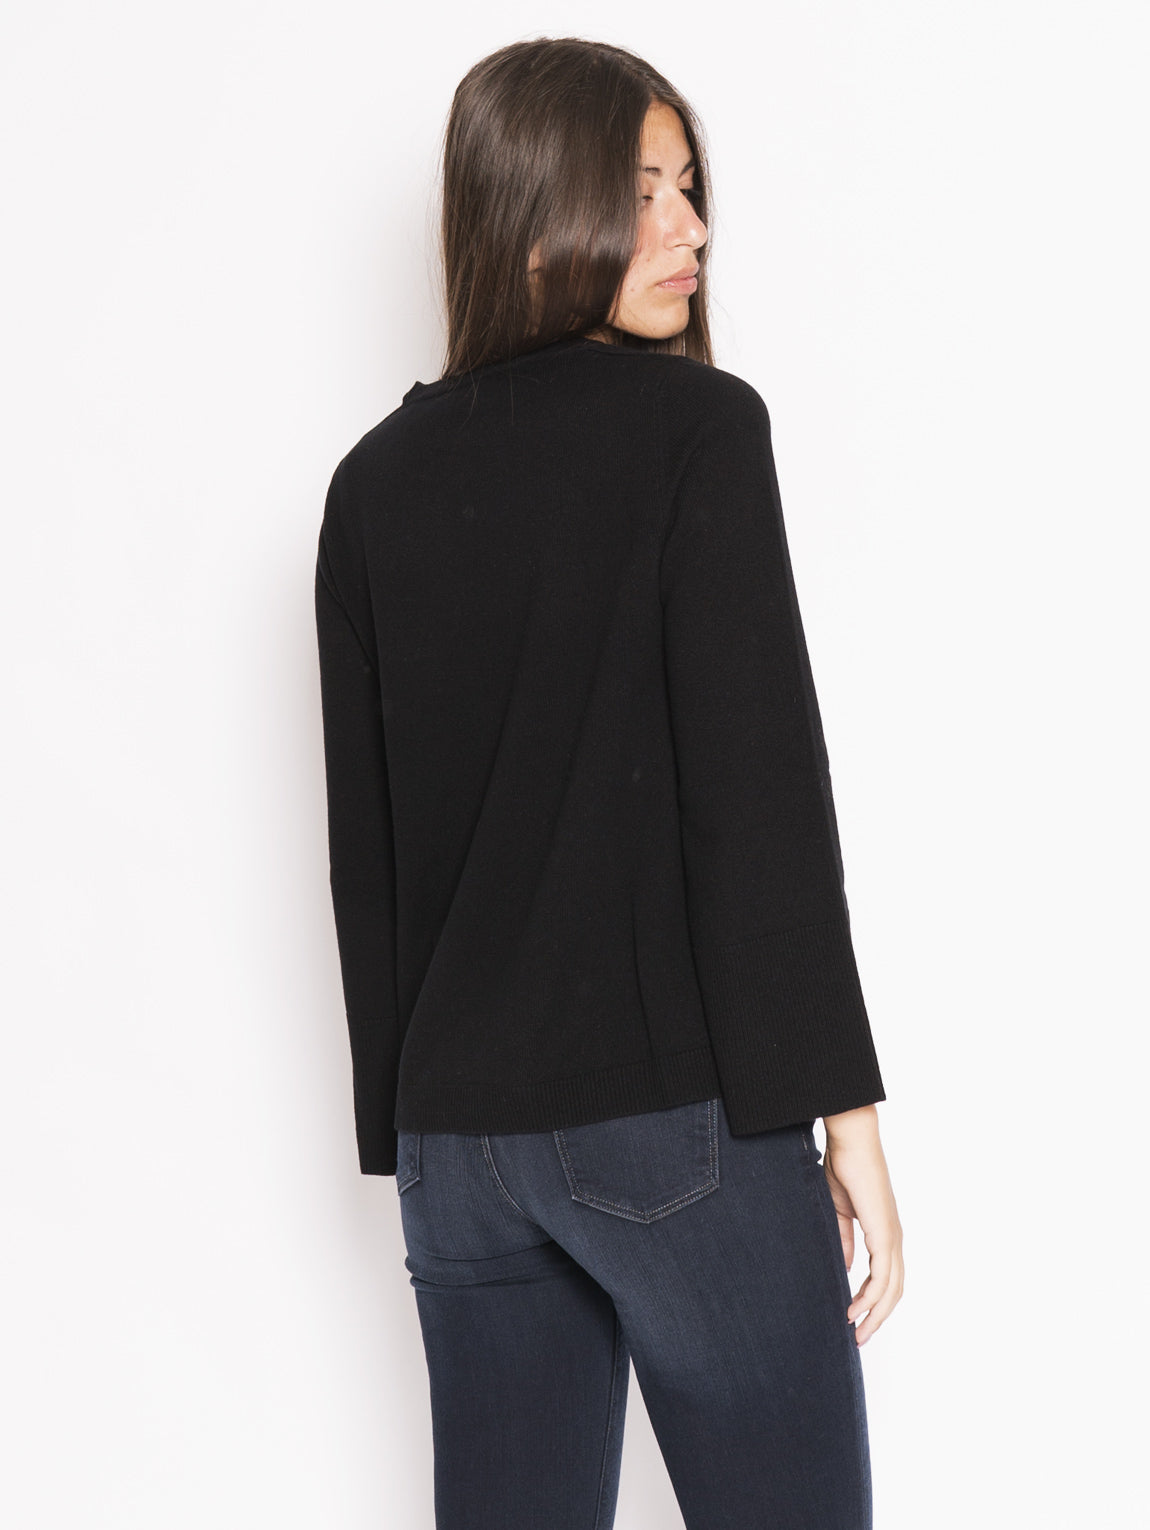 Sweater with maxi cuff in Black wool blend